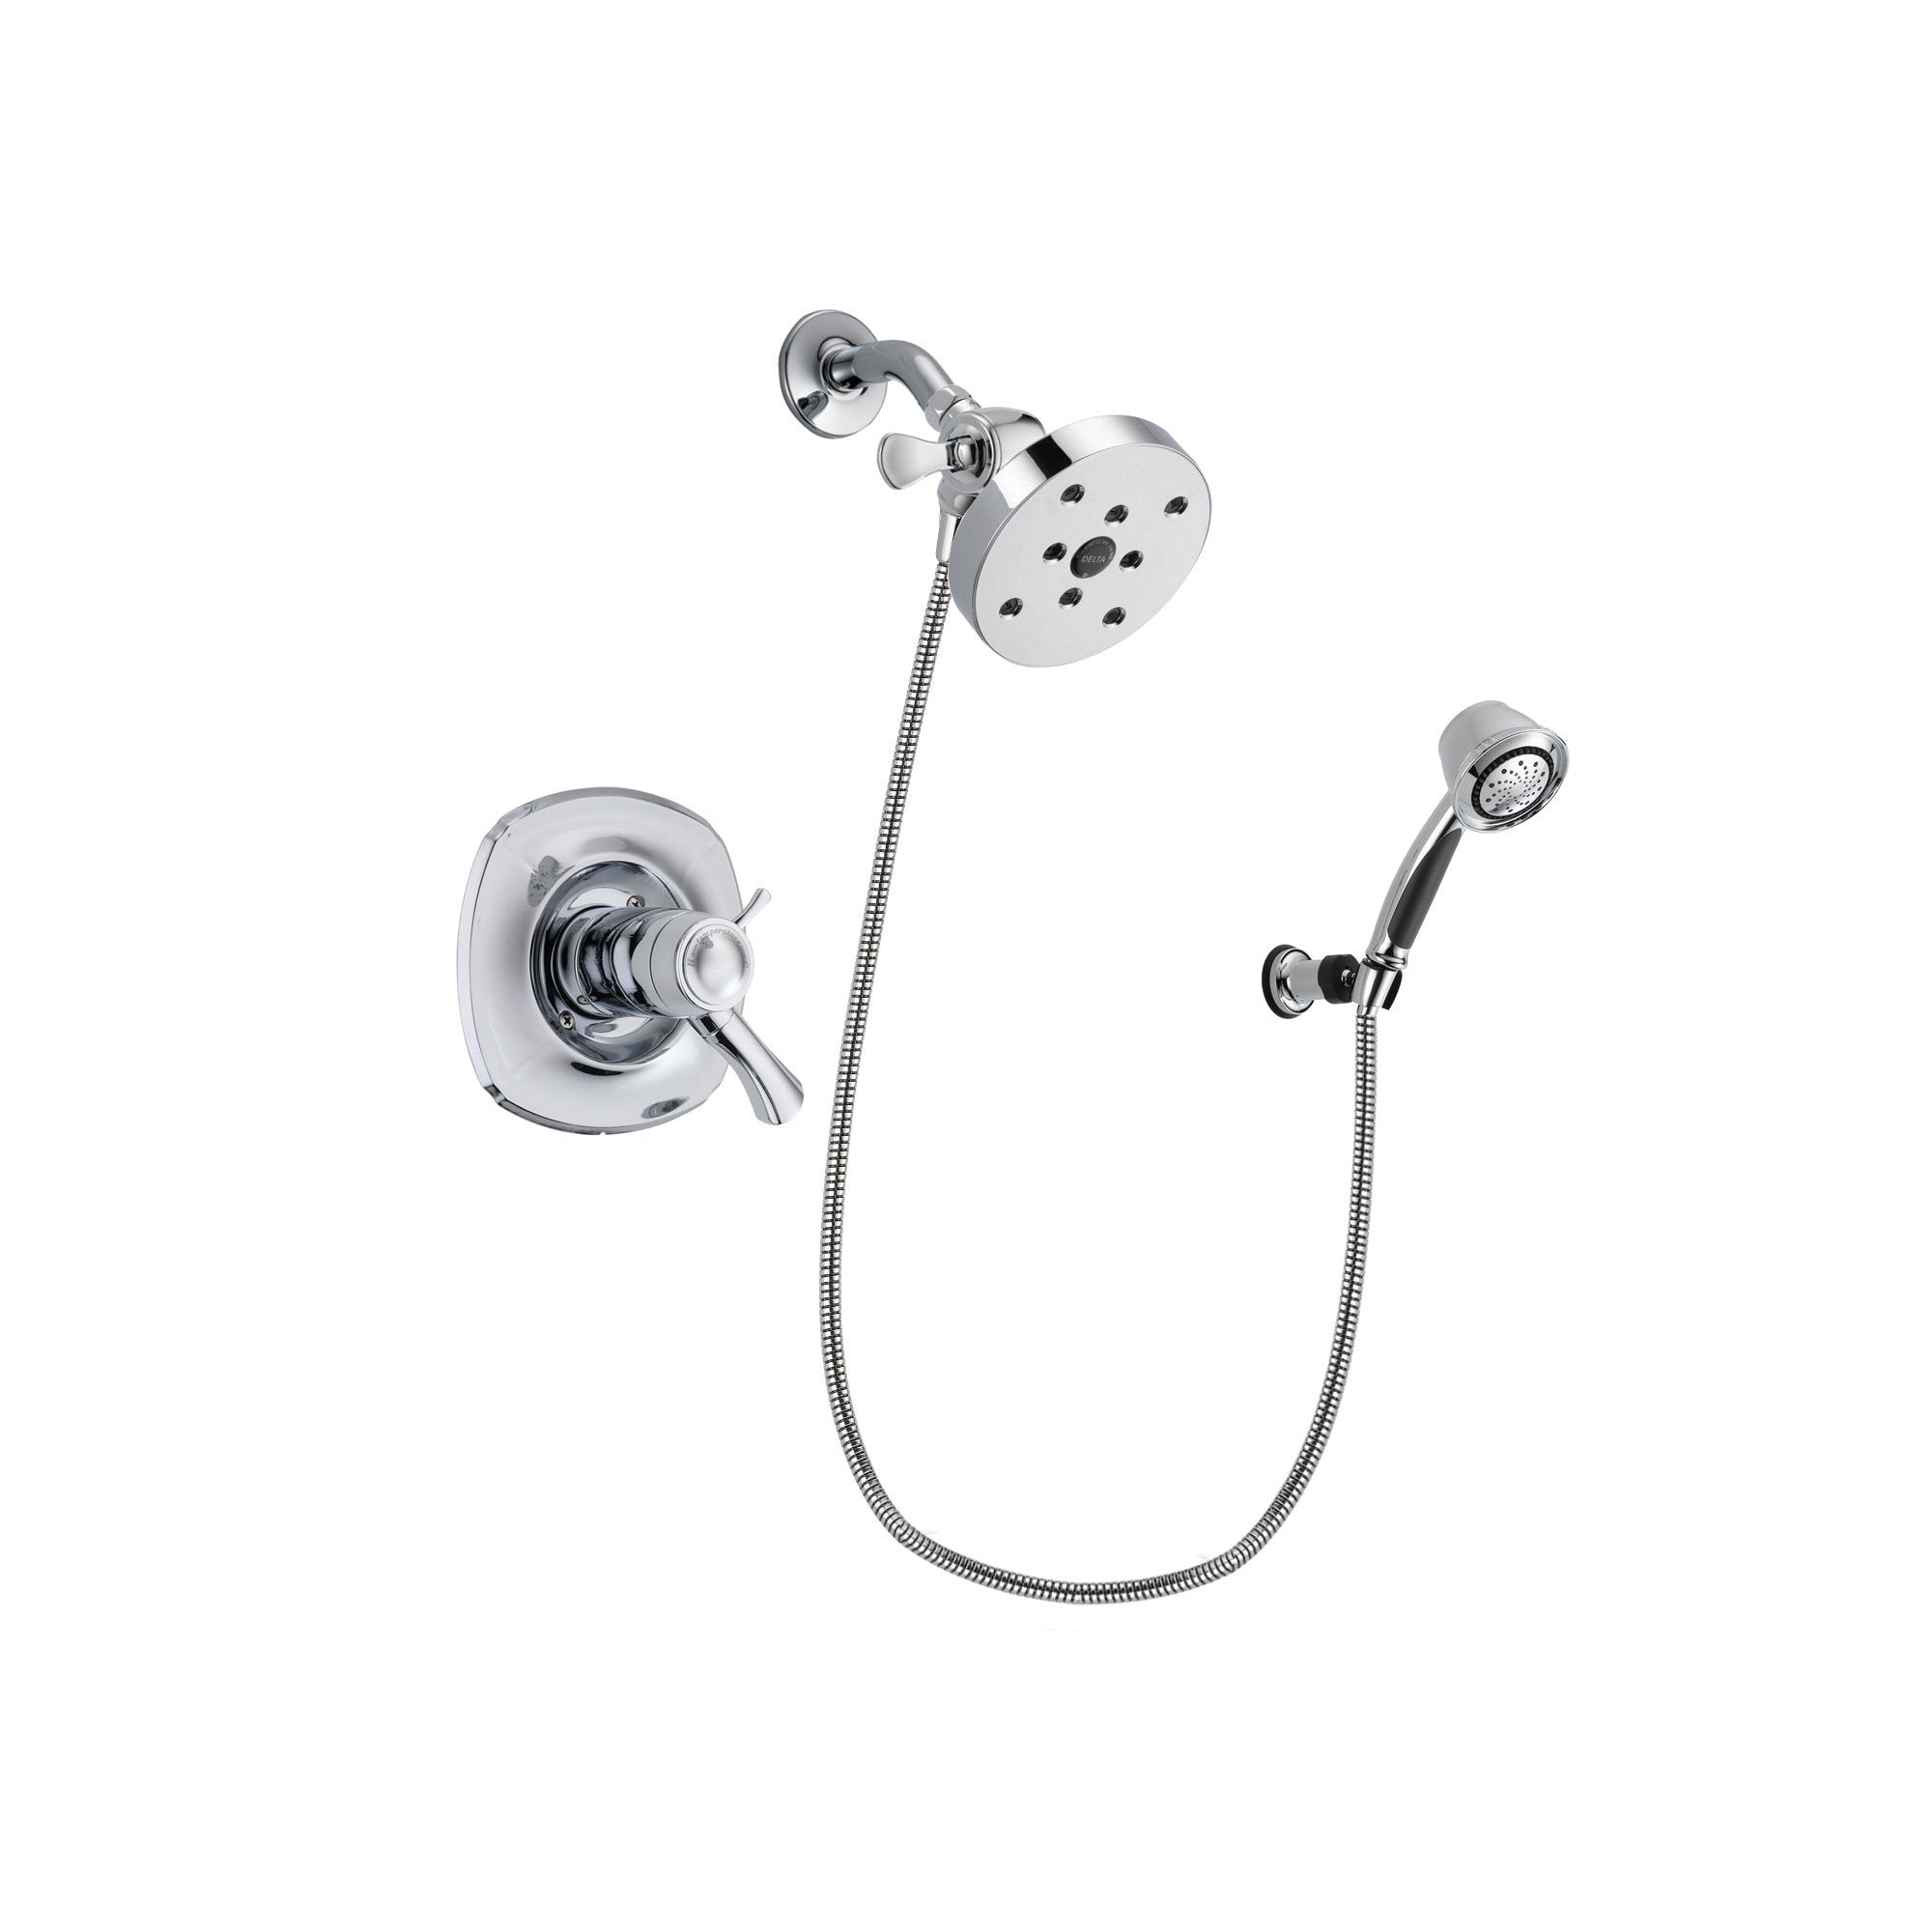 Delta Addison Chrome Finish Thermostatic Shower Faucet System Package with 5-1/2 inch Shower Head and 5-Spray Adjustable Wall Mount Hand Shower Includes Rough-in Valve DSP0398V